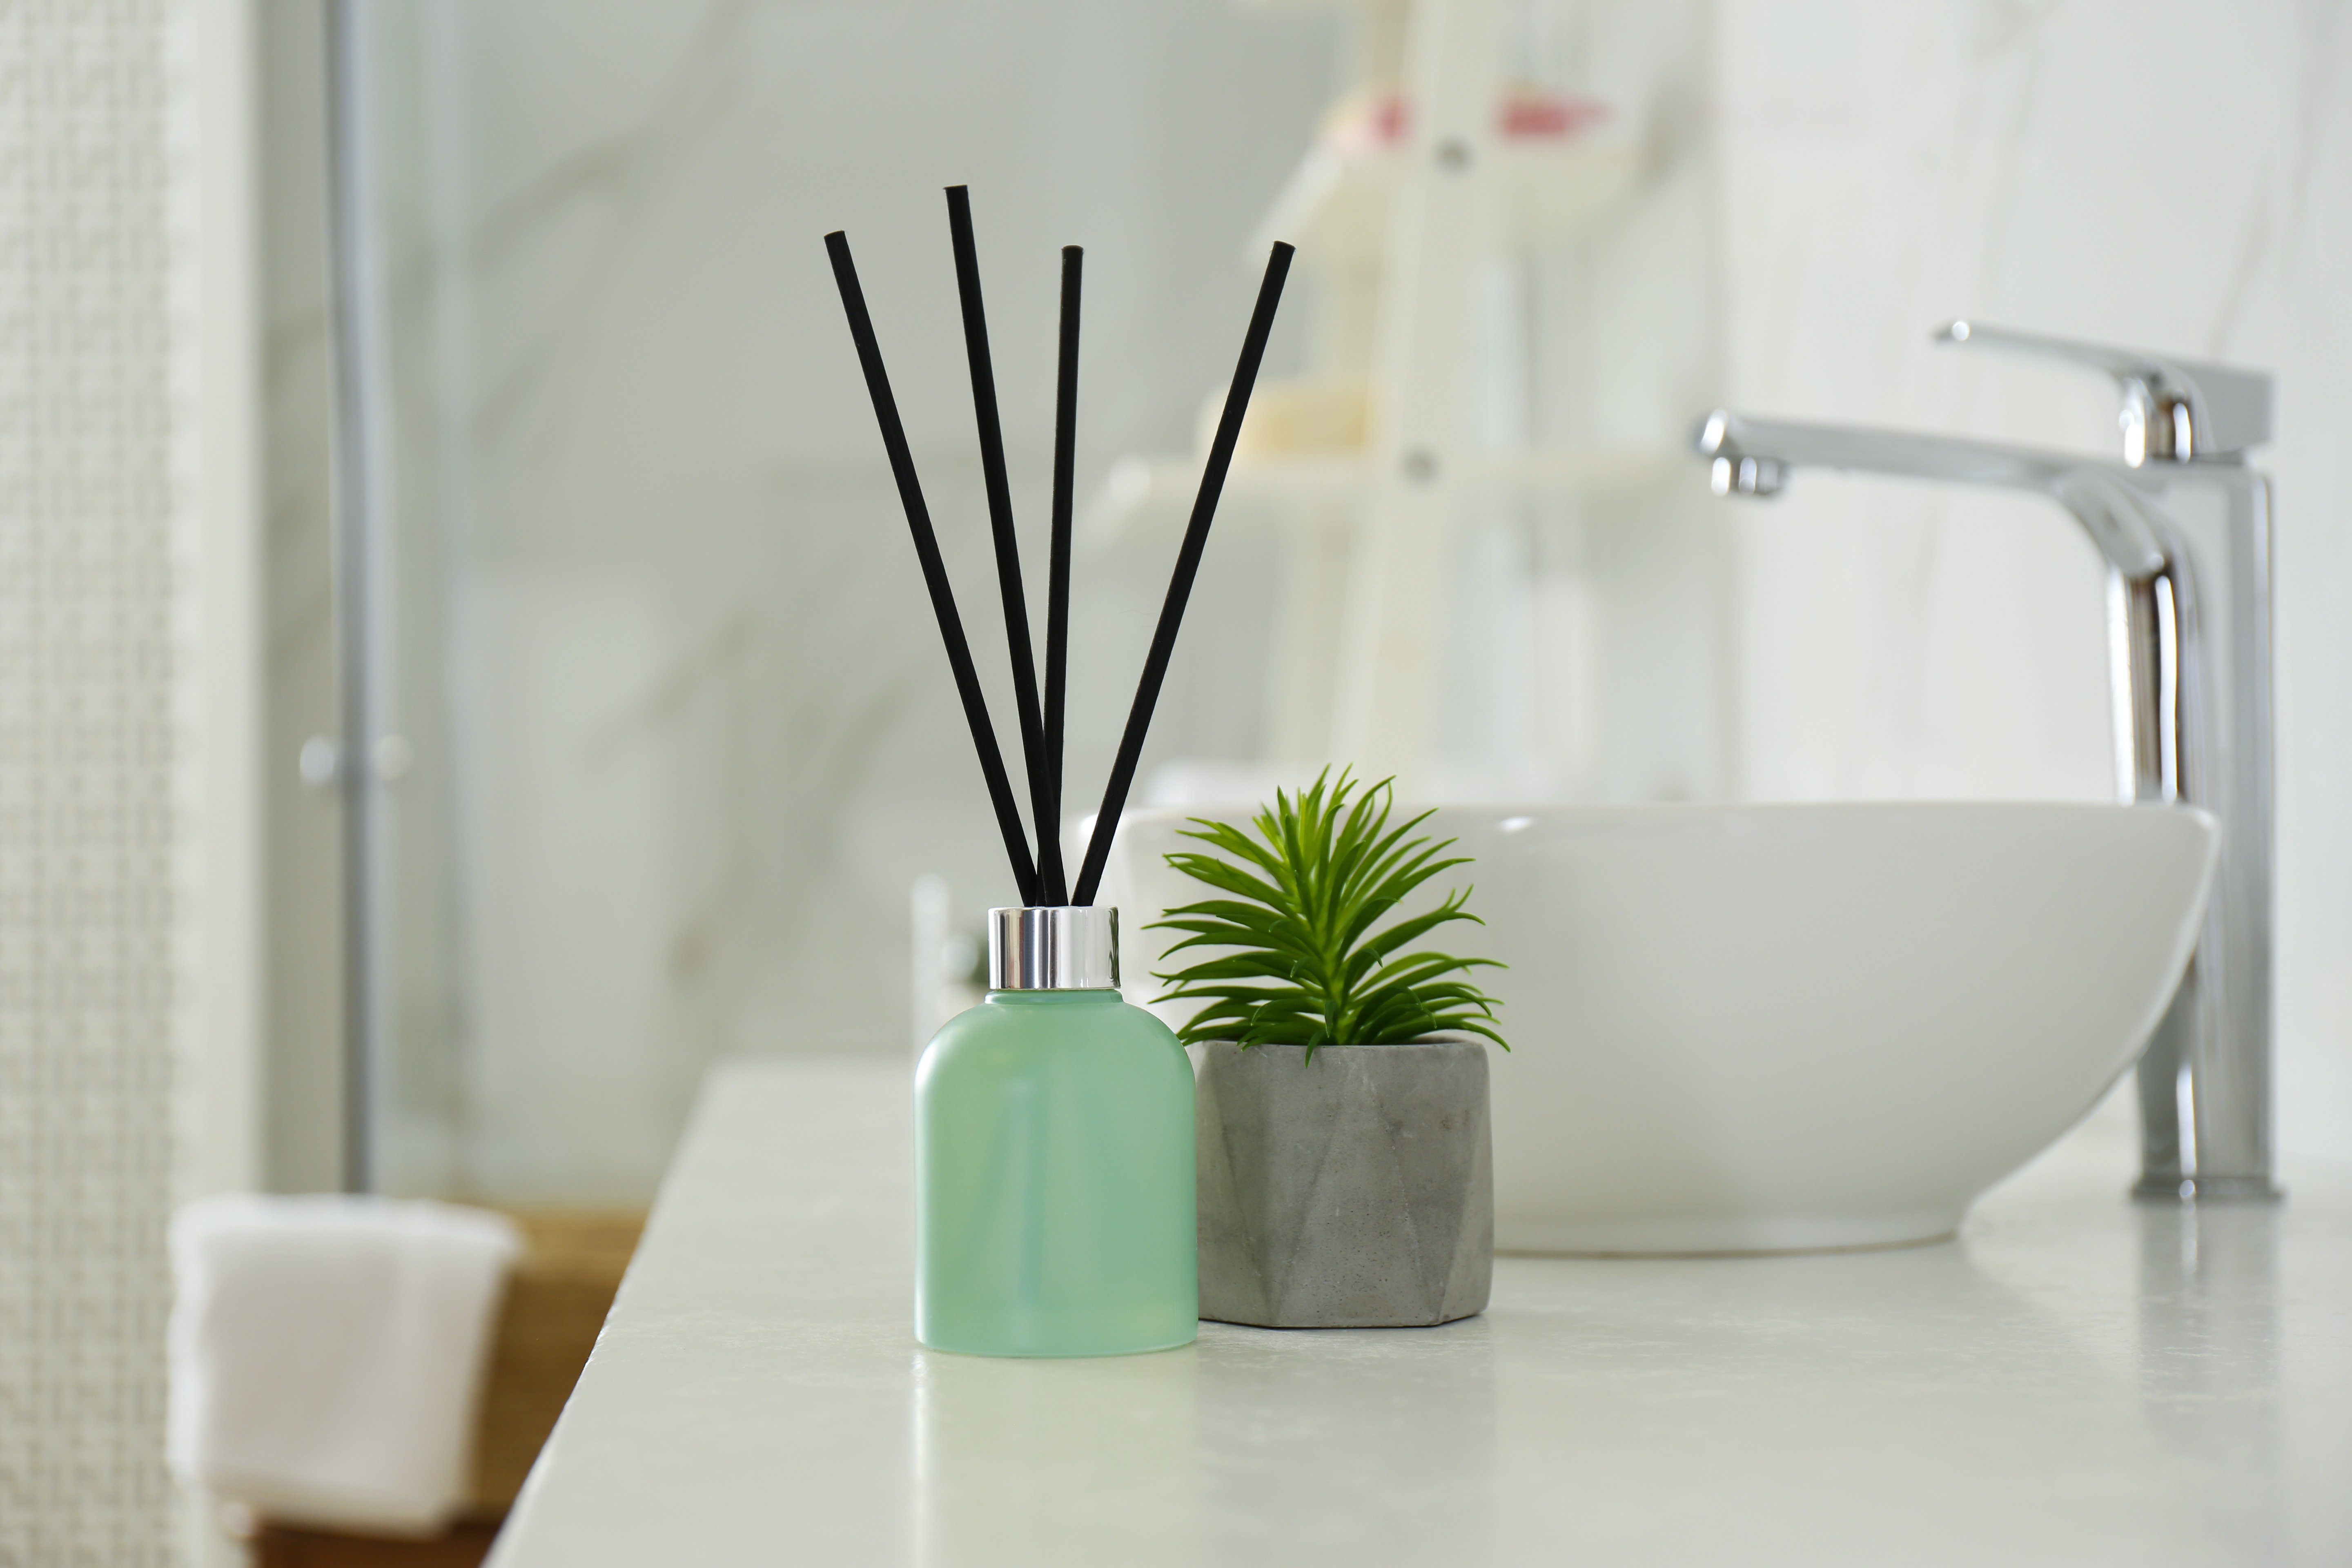 Use air fresheners or scents to keep the bathroom smelling clean and fresh. | Source: Shutterstock